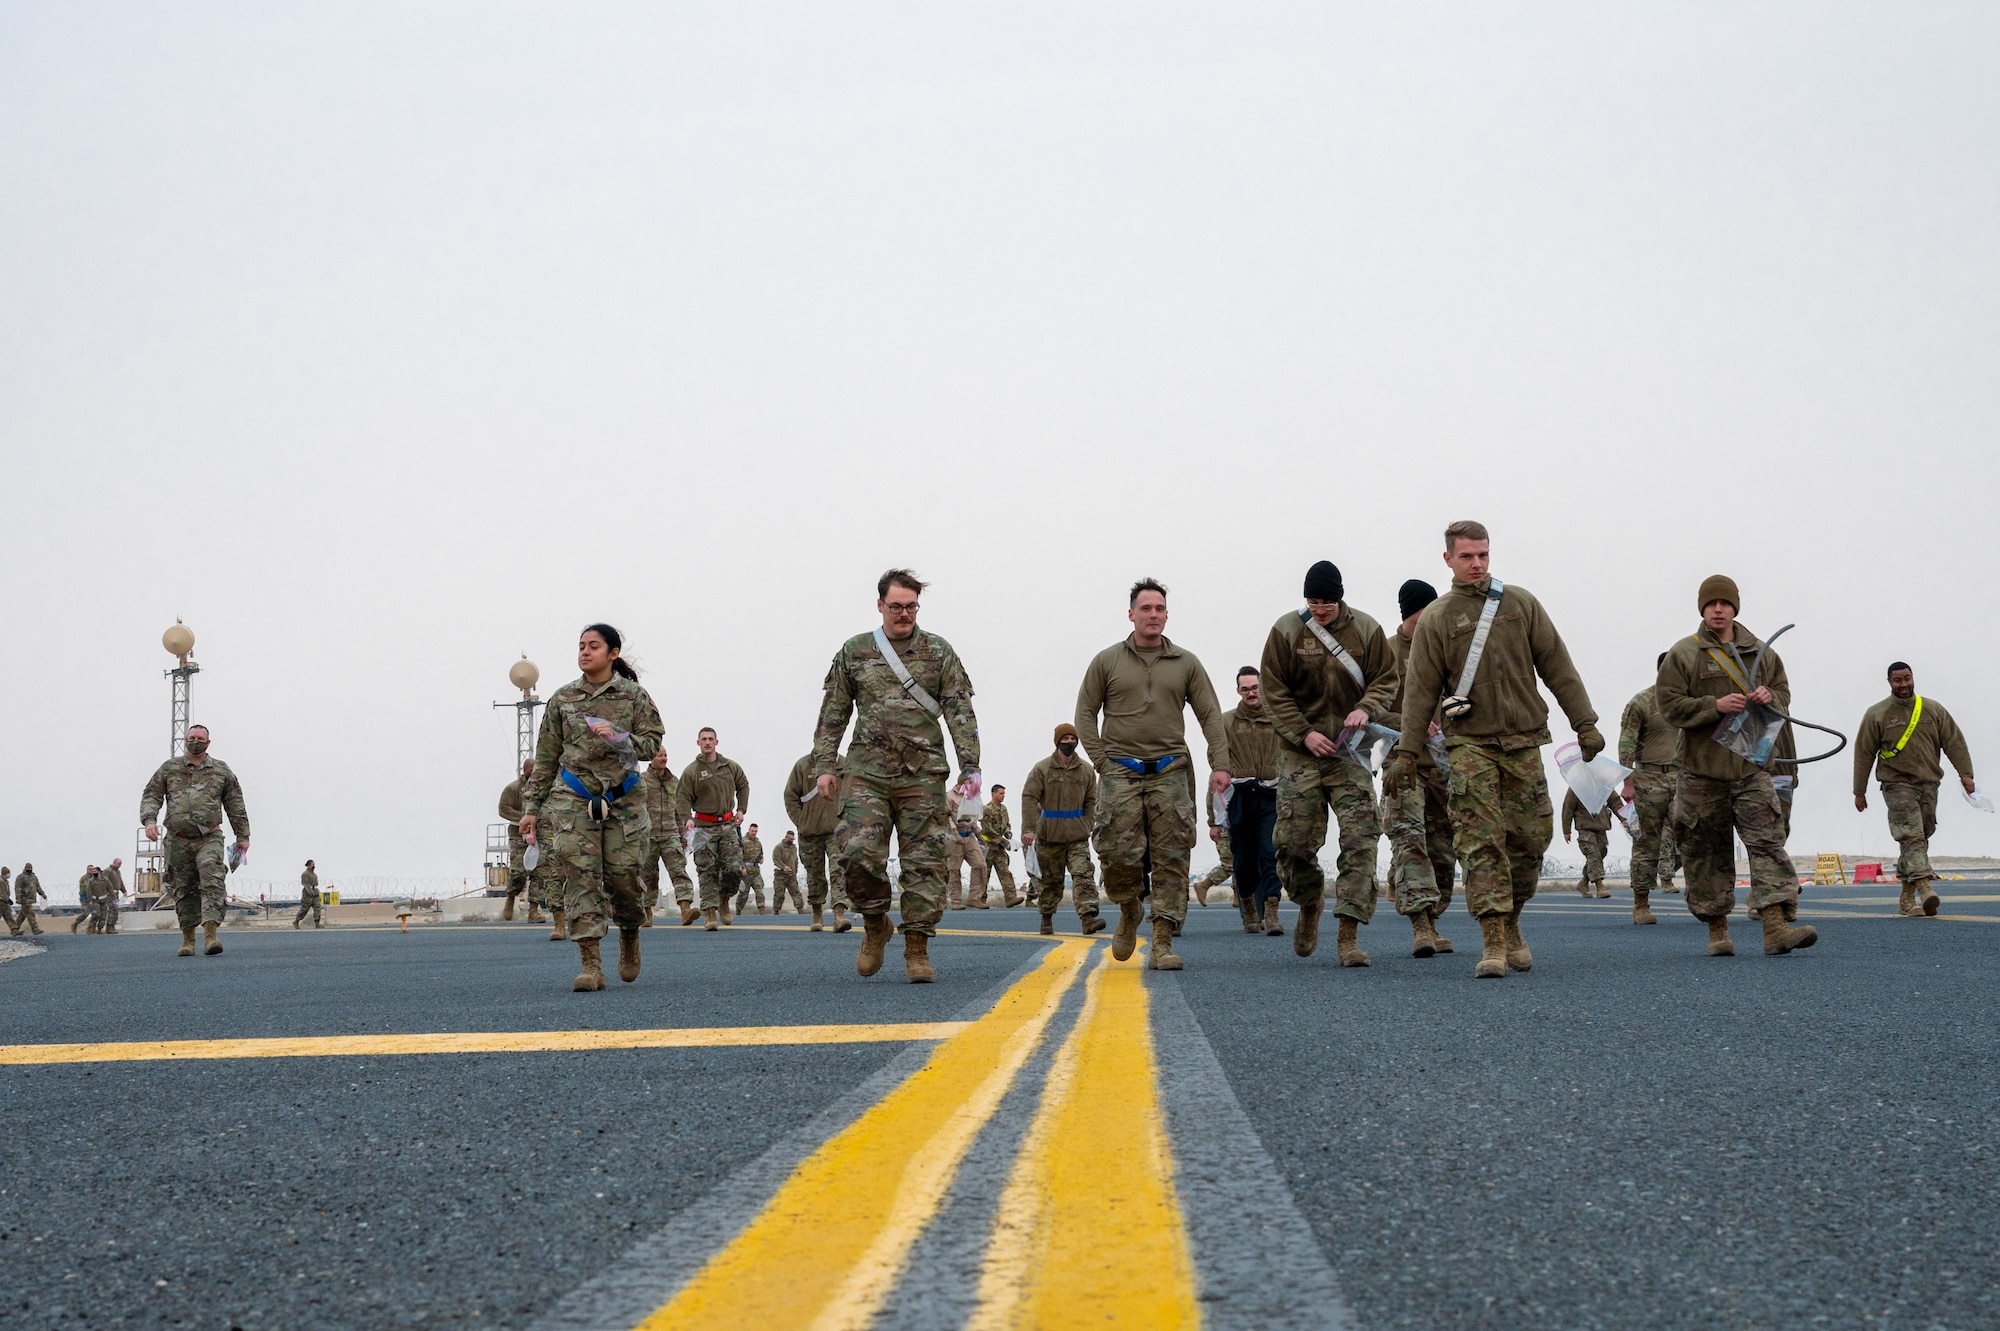 Airmen from the 386th Expeditionary Maintenance Group, including some from the 407th Expeditionary Operations Support Squadron, conduct FOD walks weekly.